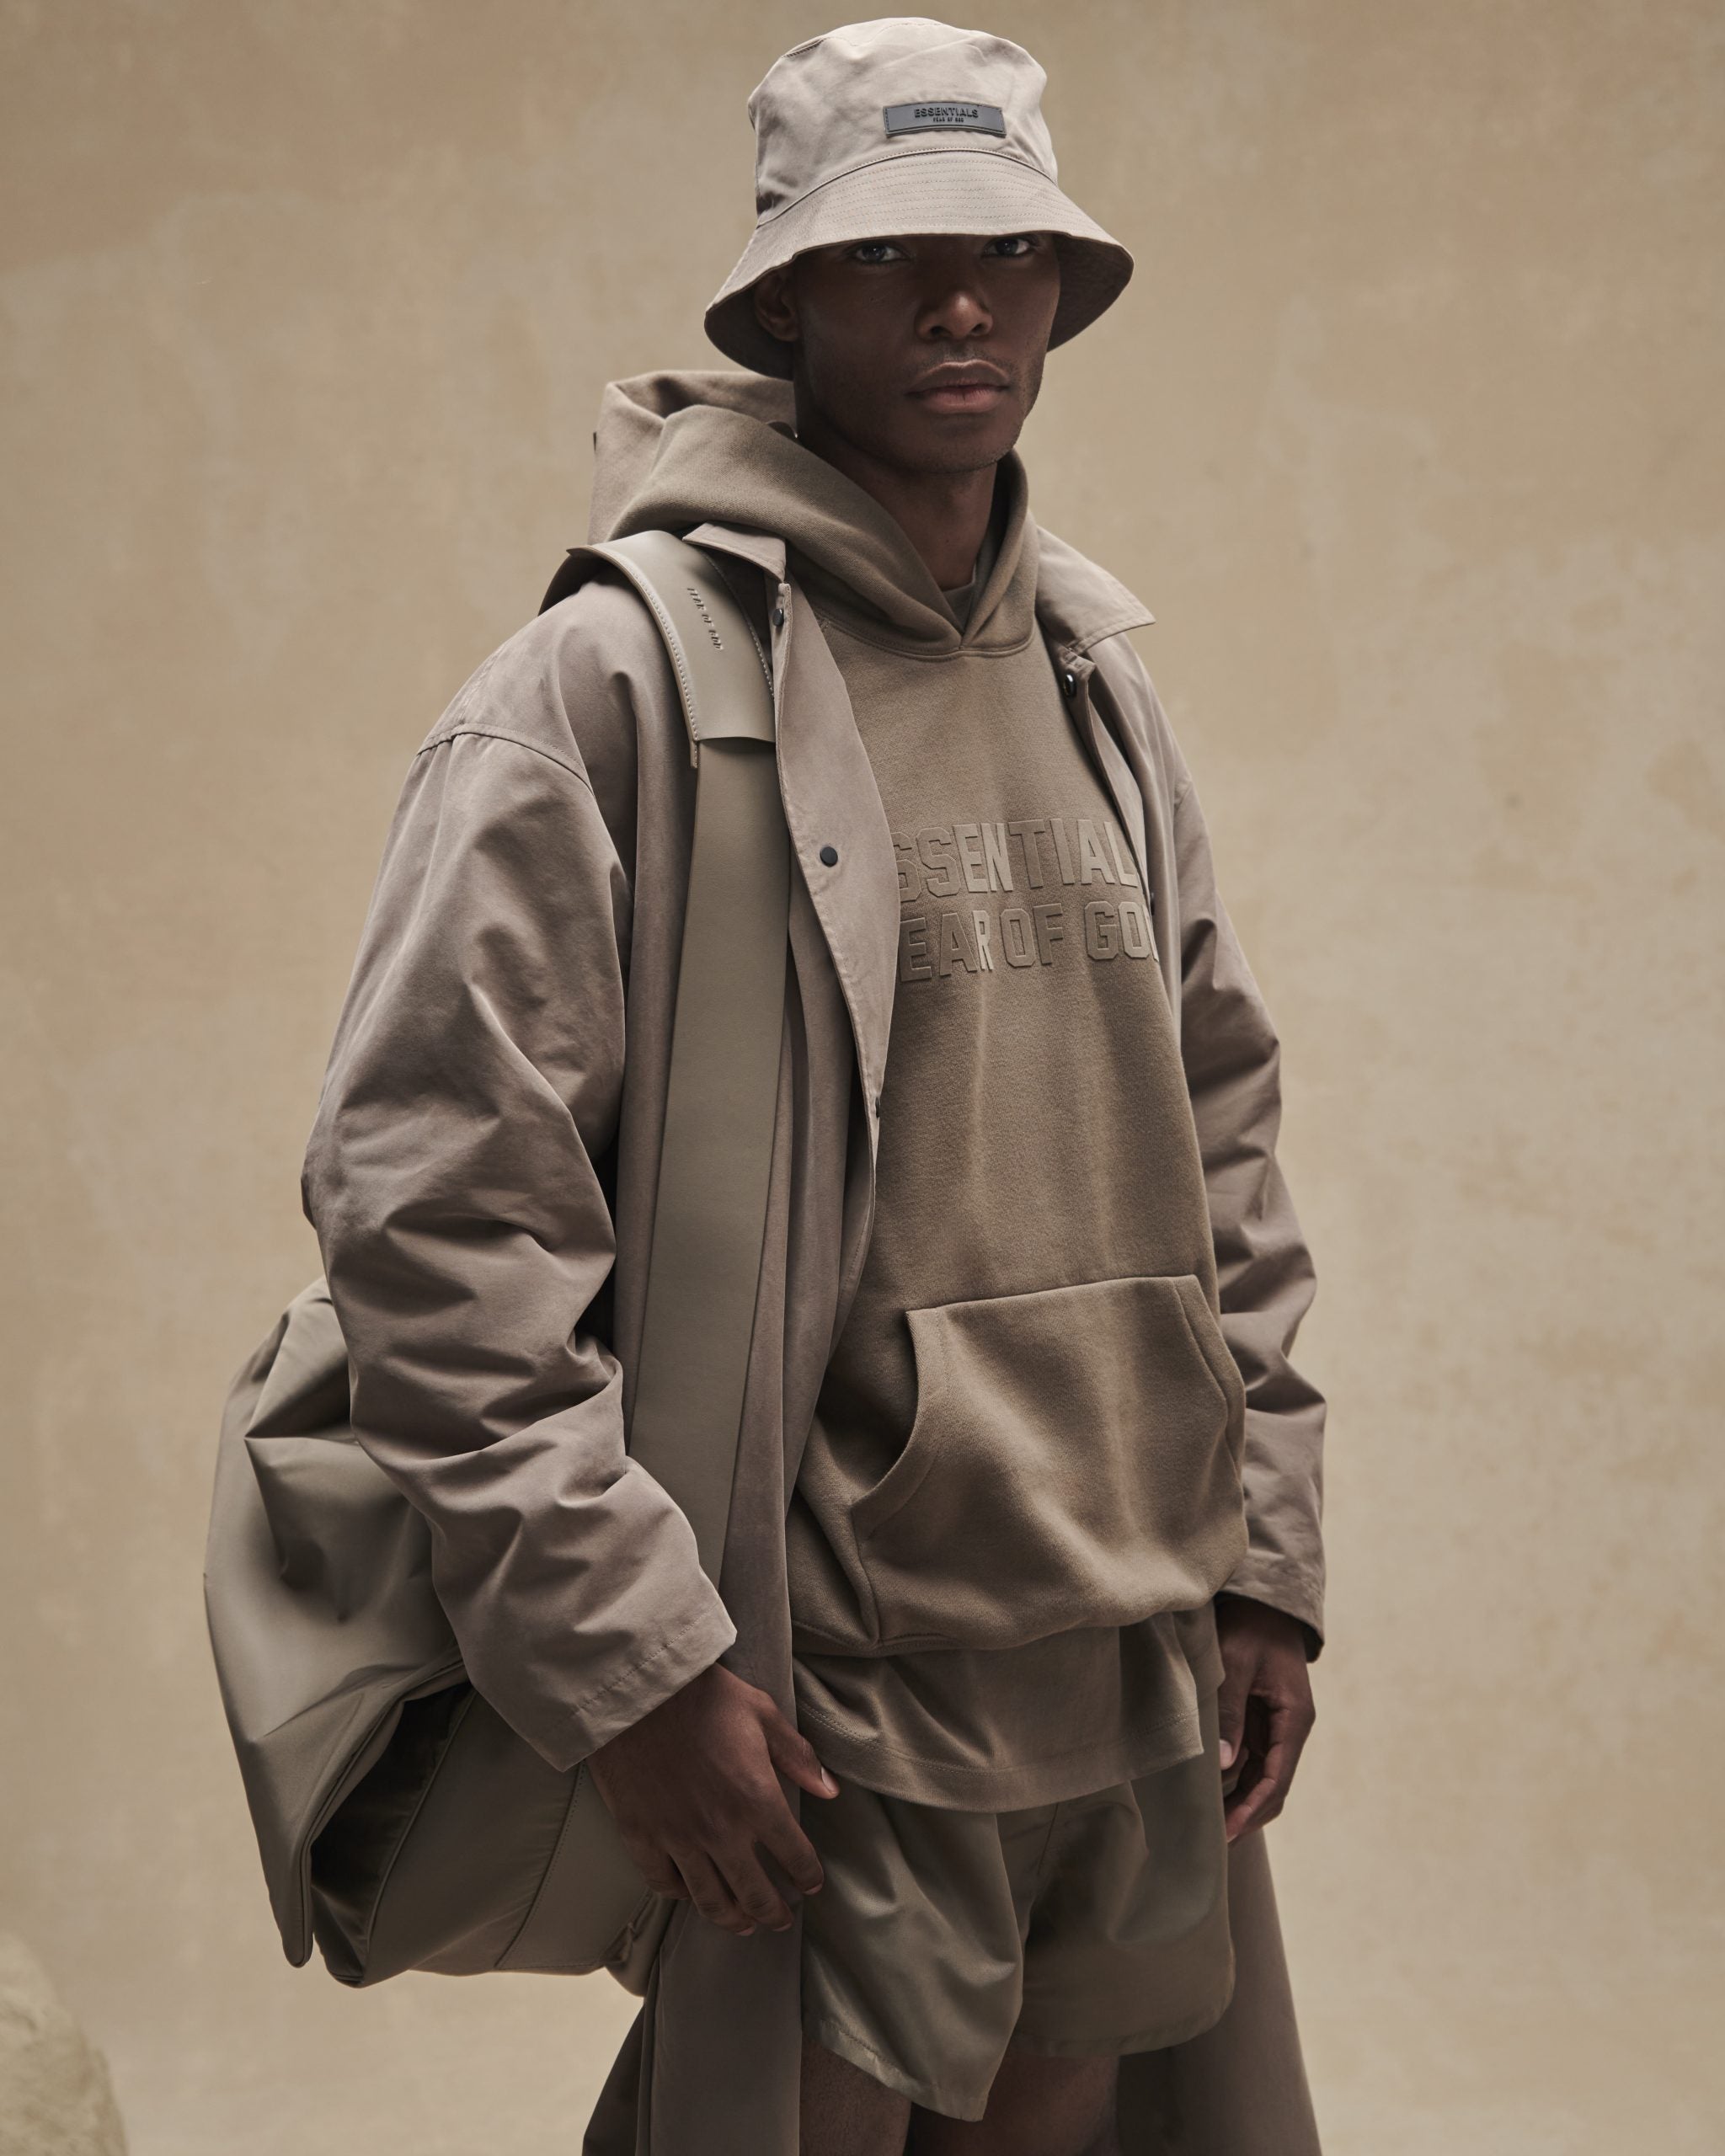 Fear Of God ESSENTIALS Launches Its New Fall Collection